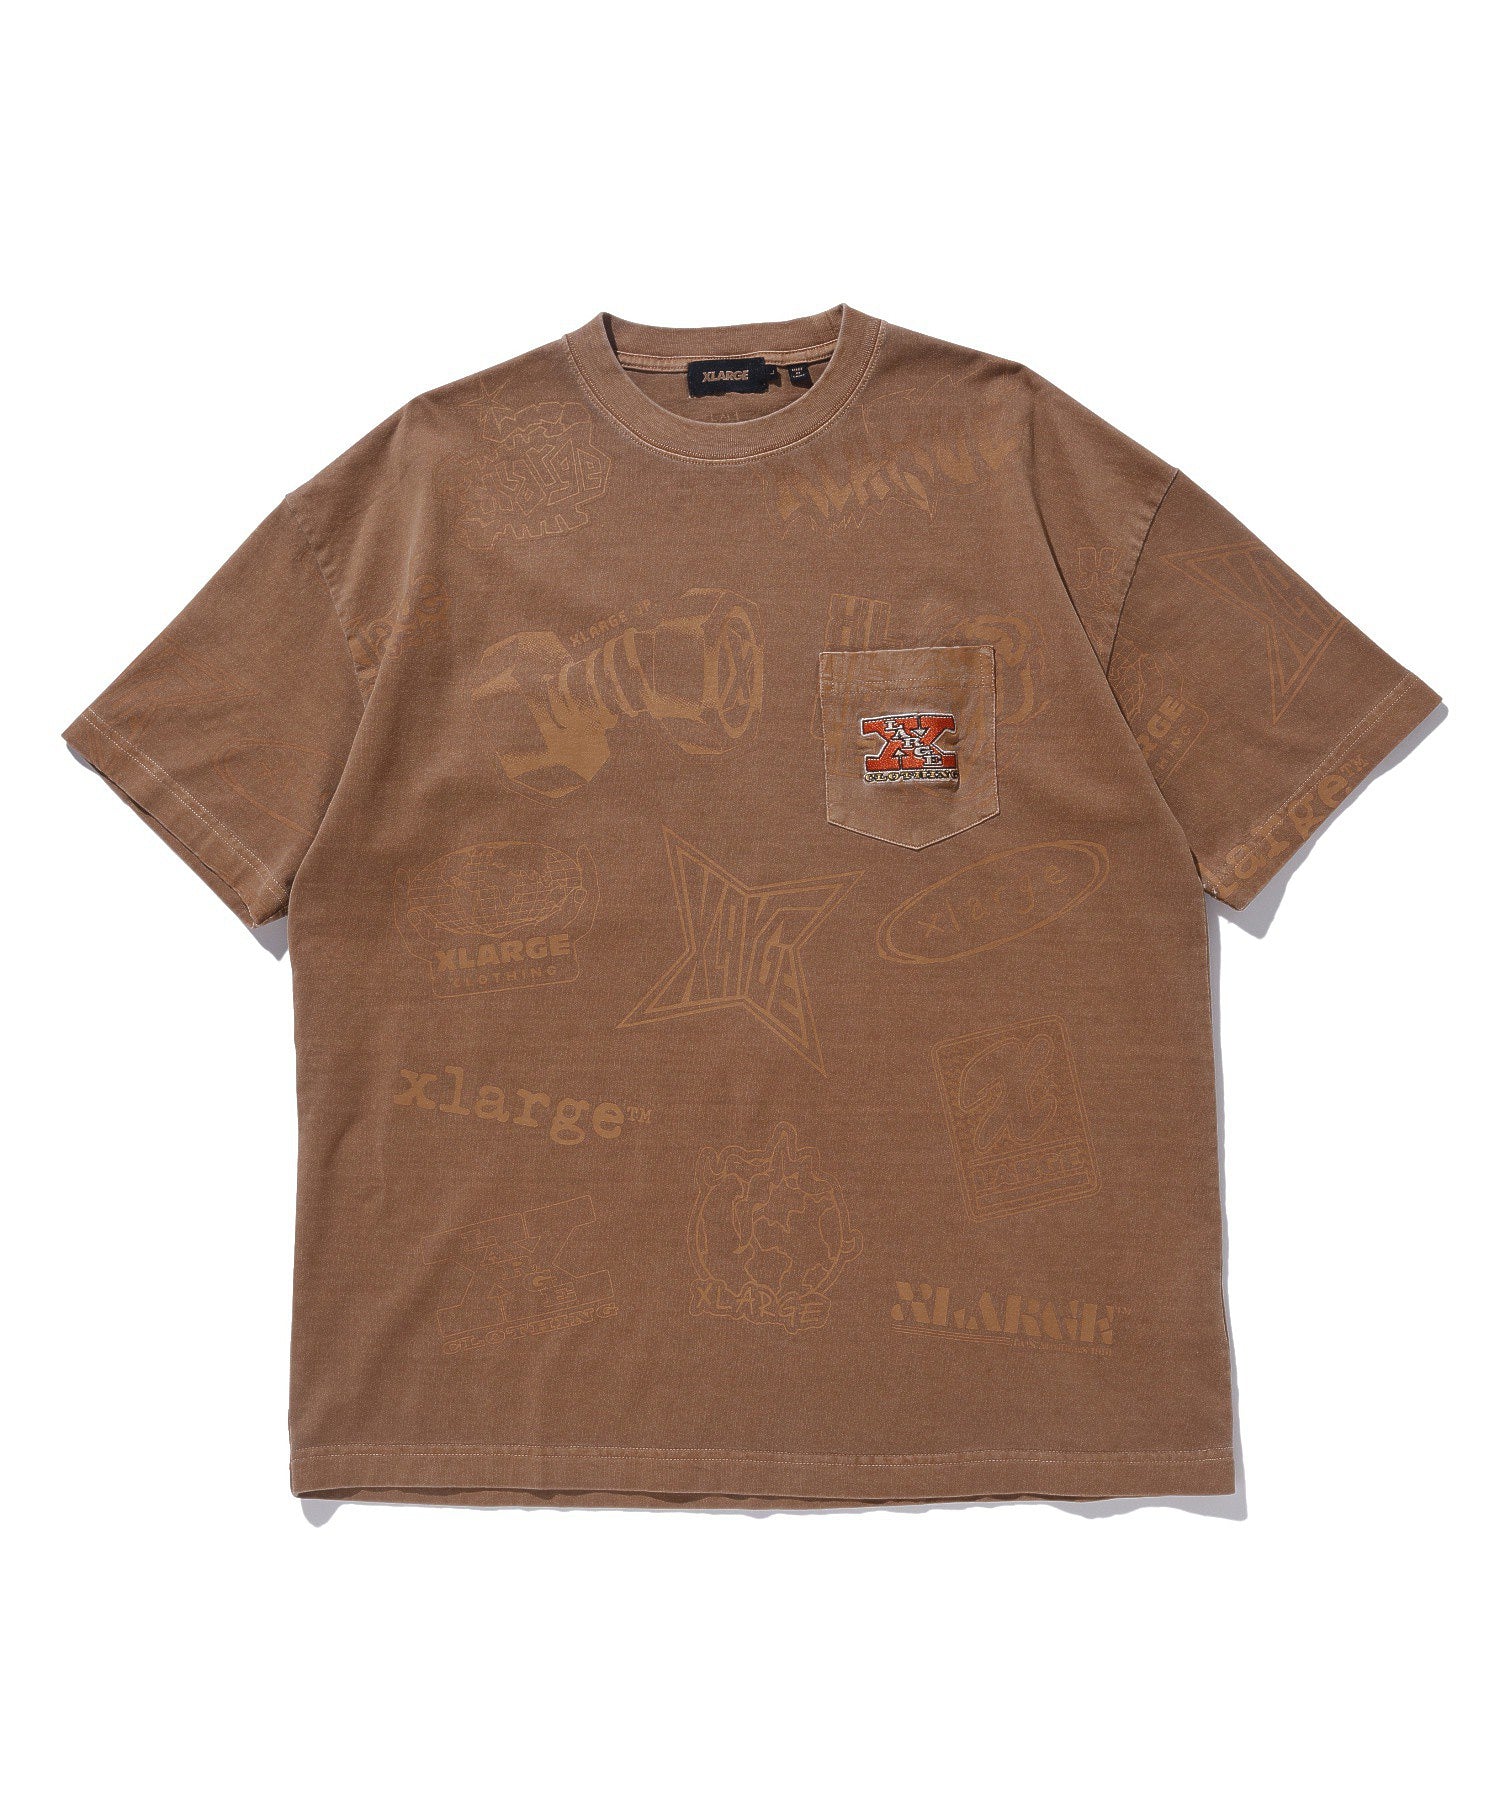 ALLOVER PRINTED S/S POCKET TEE